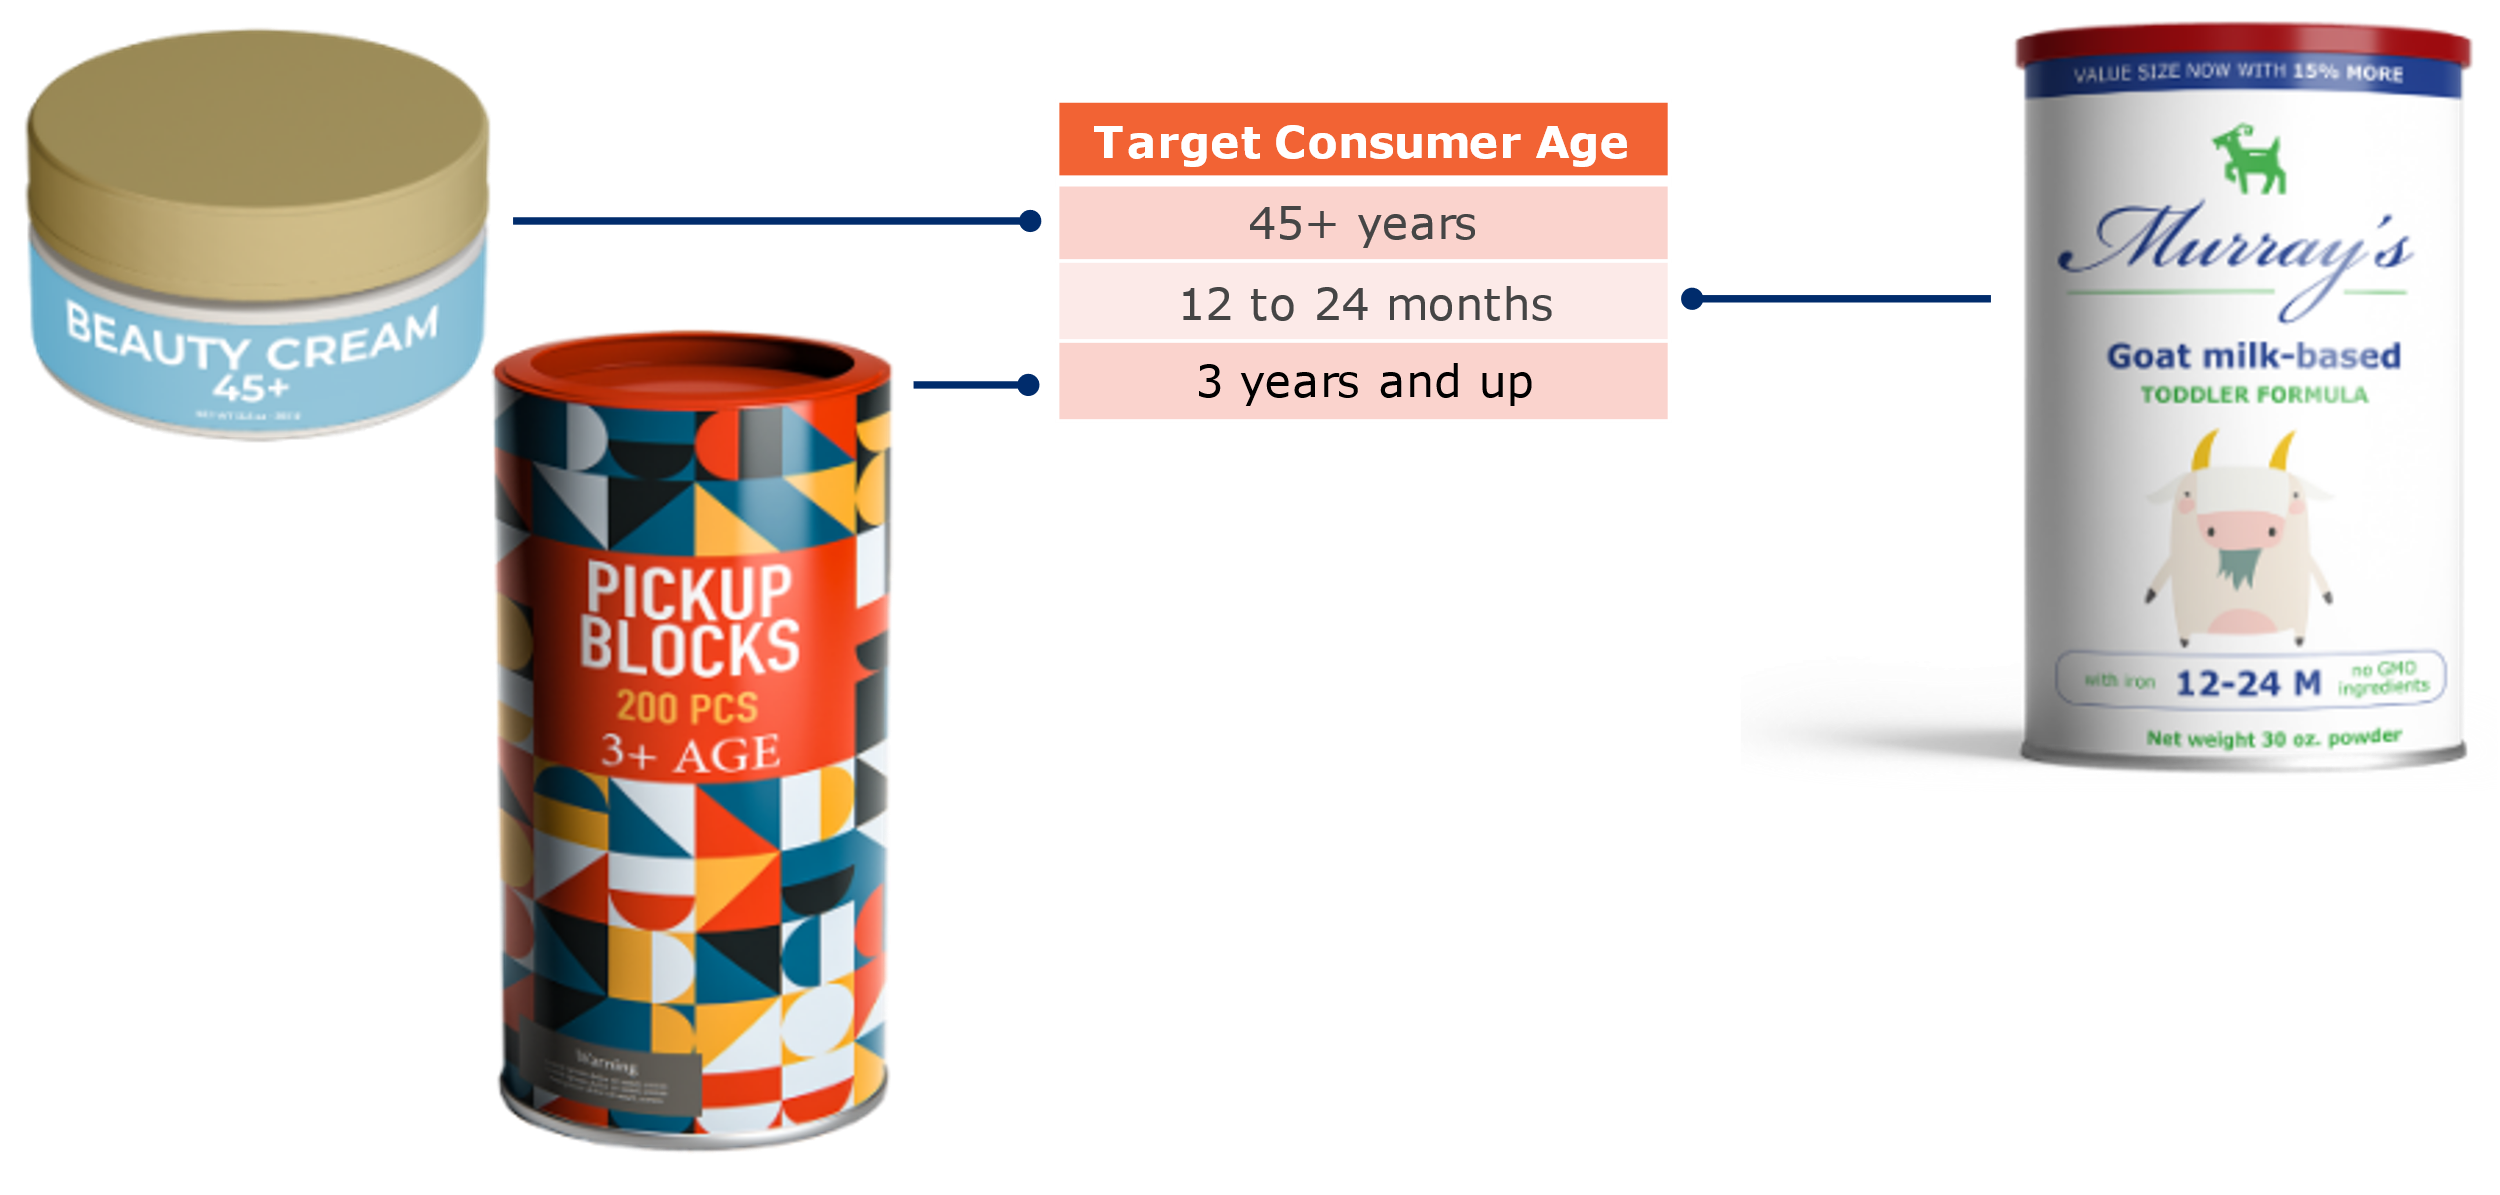 7.6 Target Consumer Age Example - Image 0